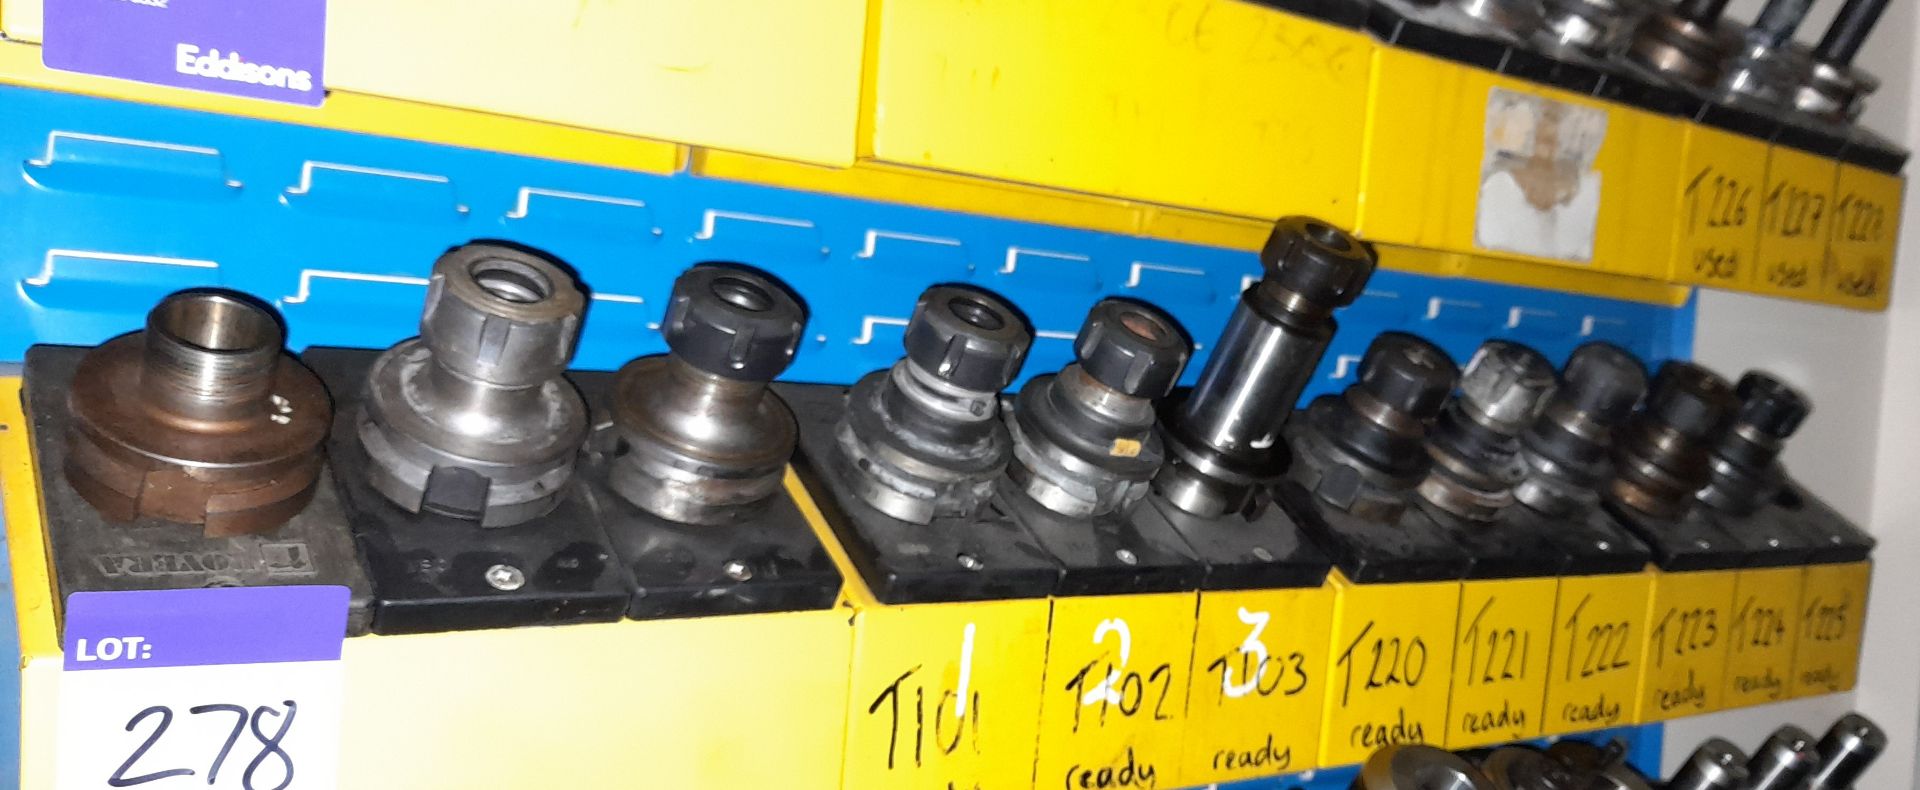 11 x Various BT40 extension CNC tool holders, to yellow holder (rack not included)